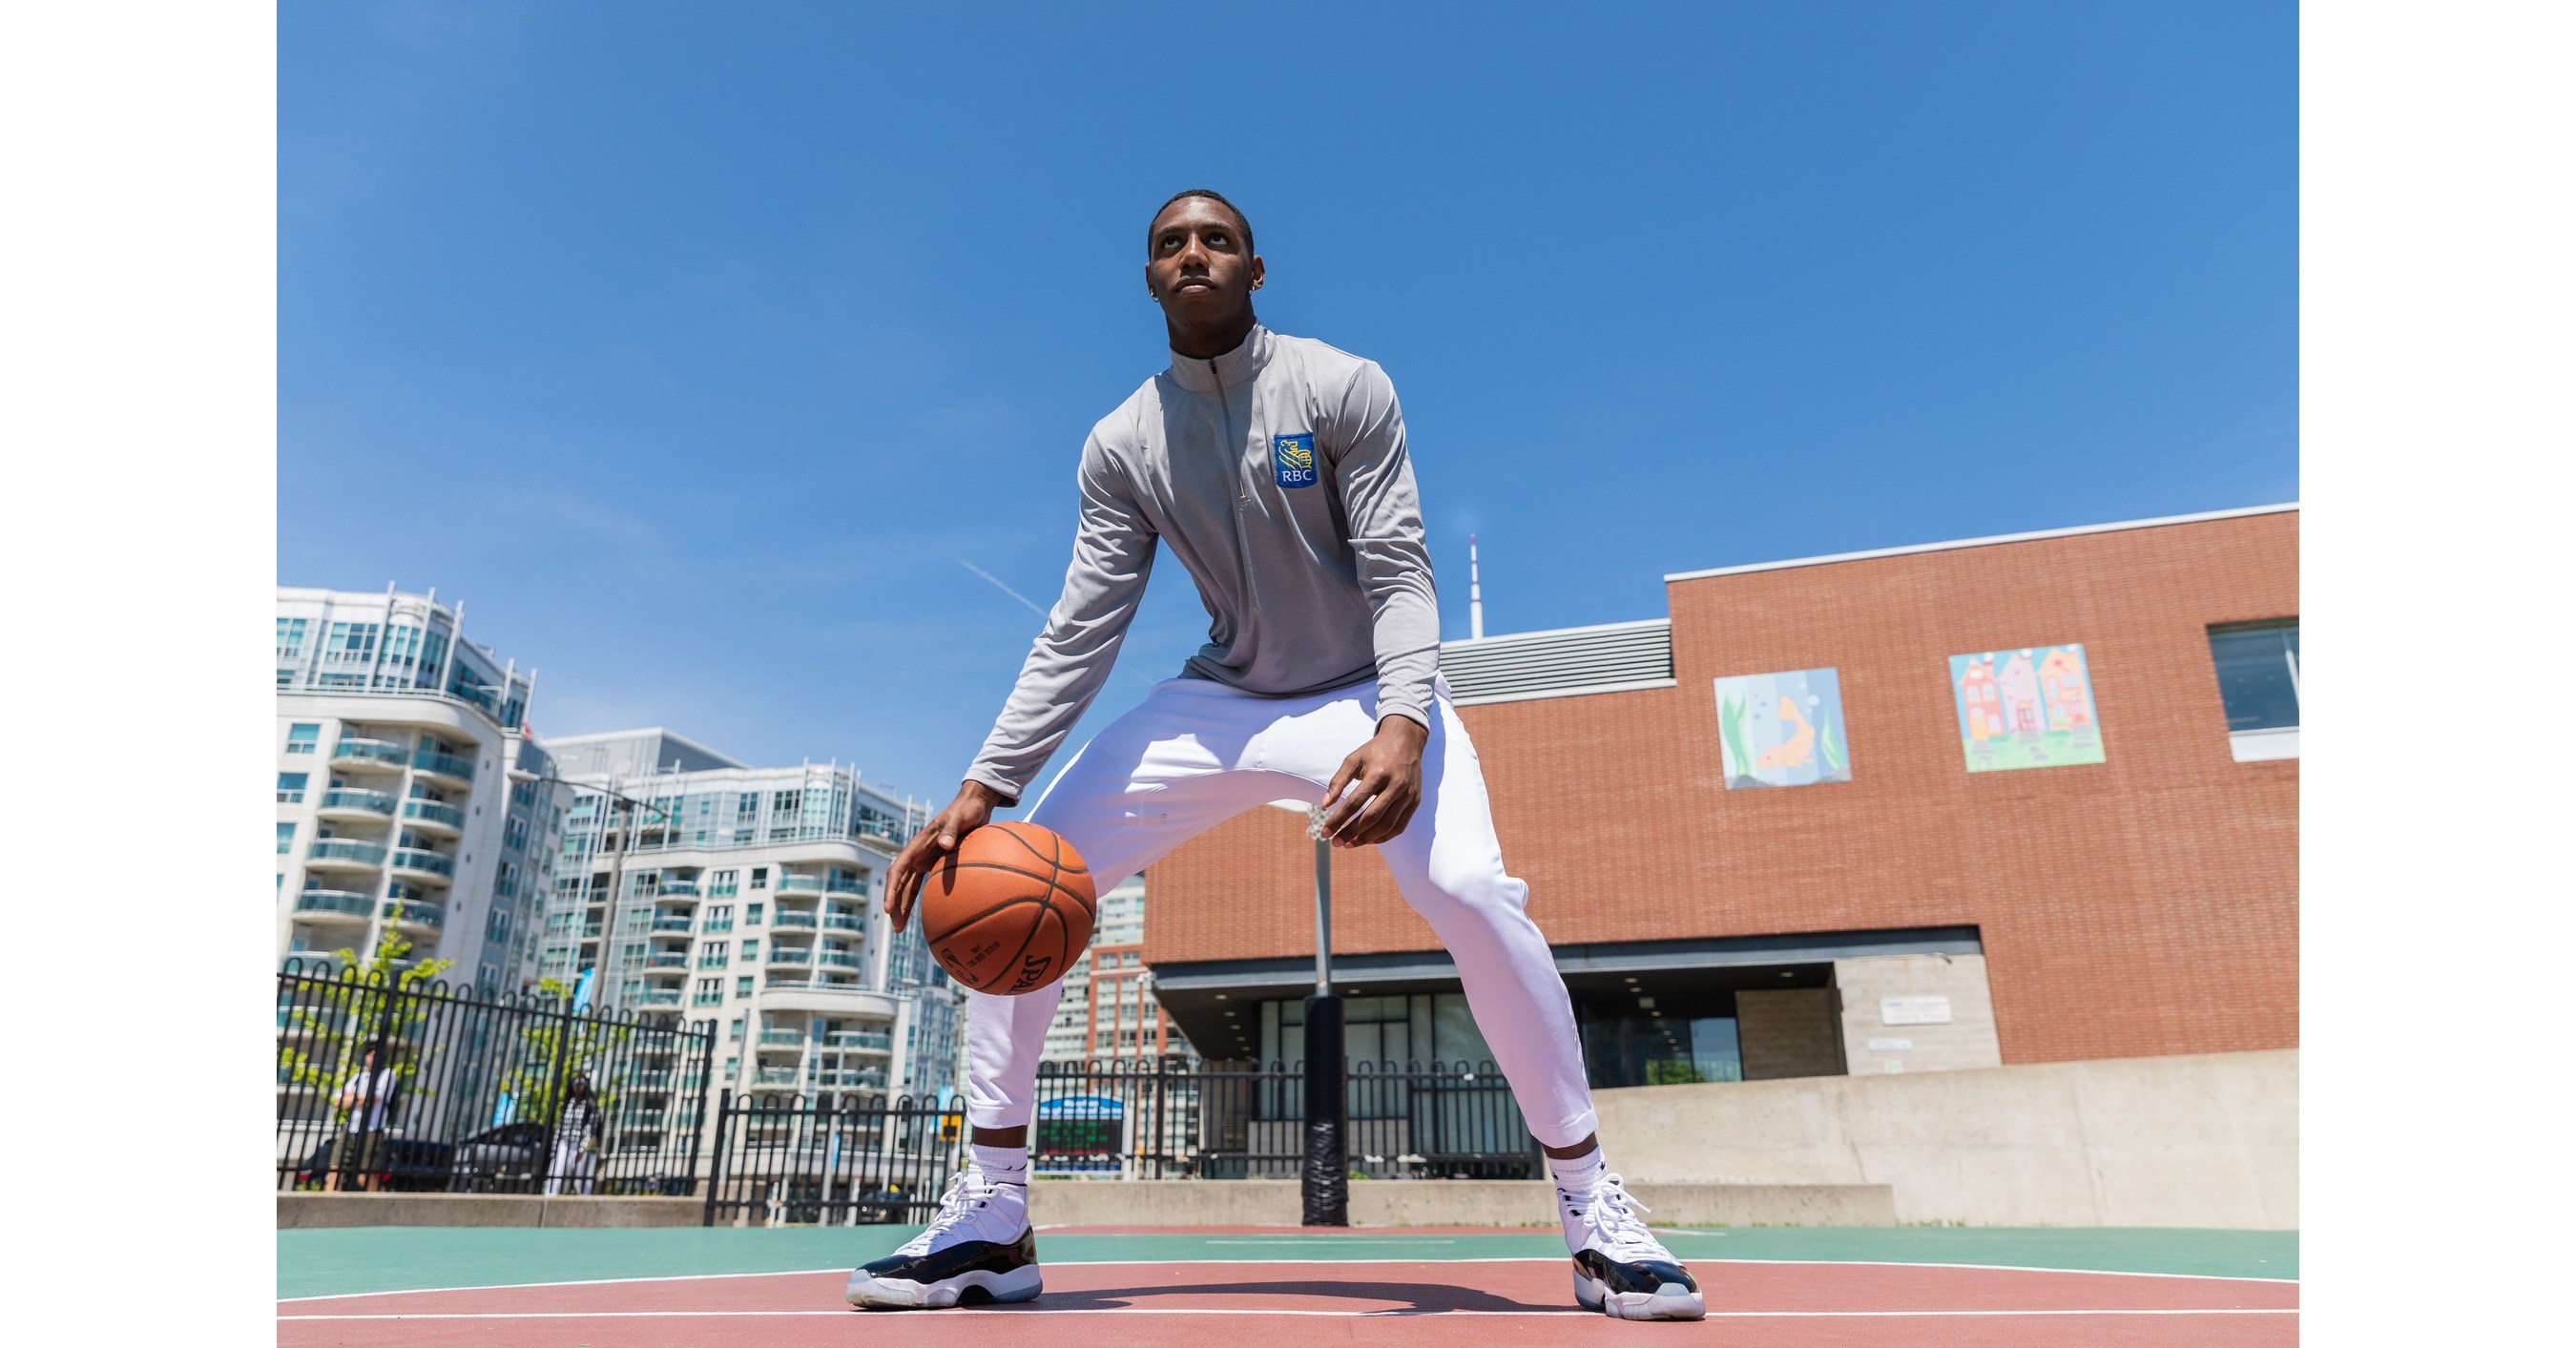 Rising Canadian basketball star R.J. Barrett to enter college 1 year early